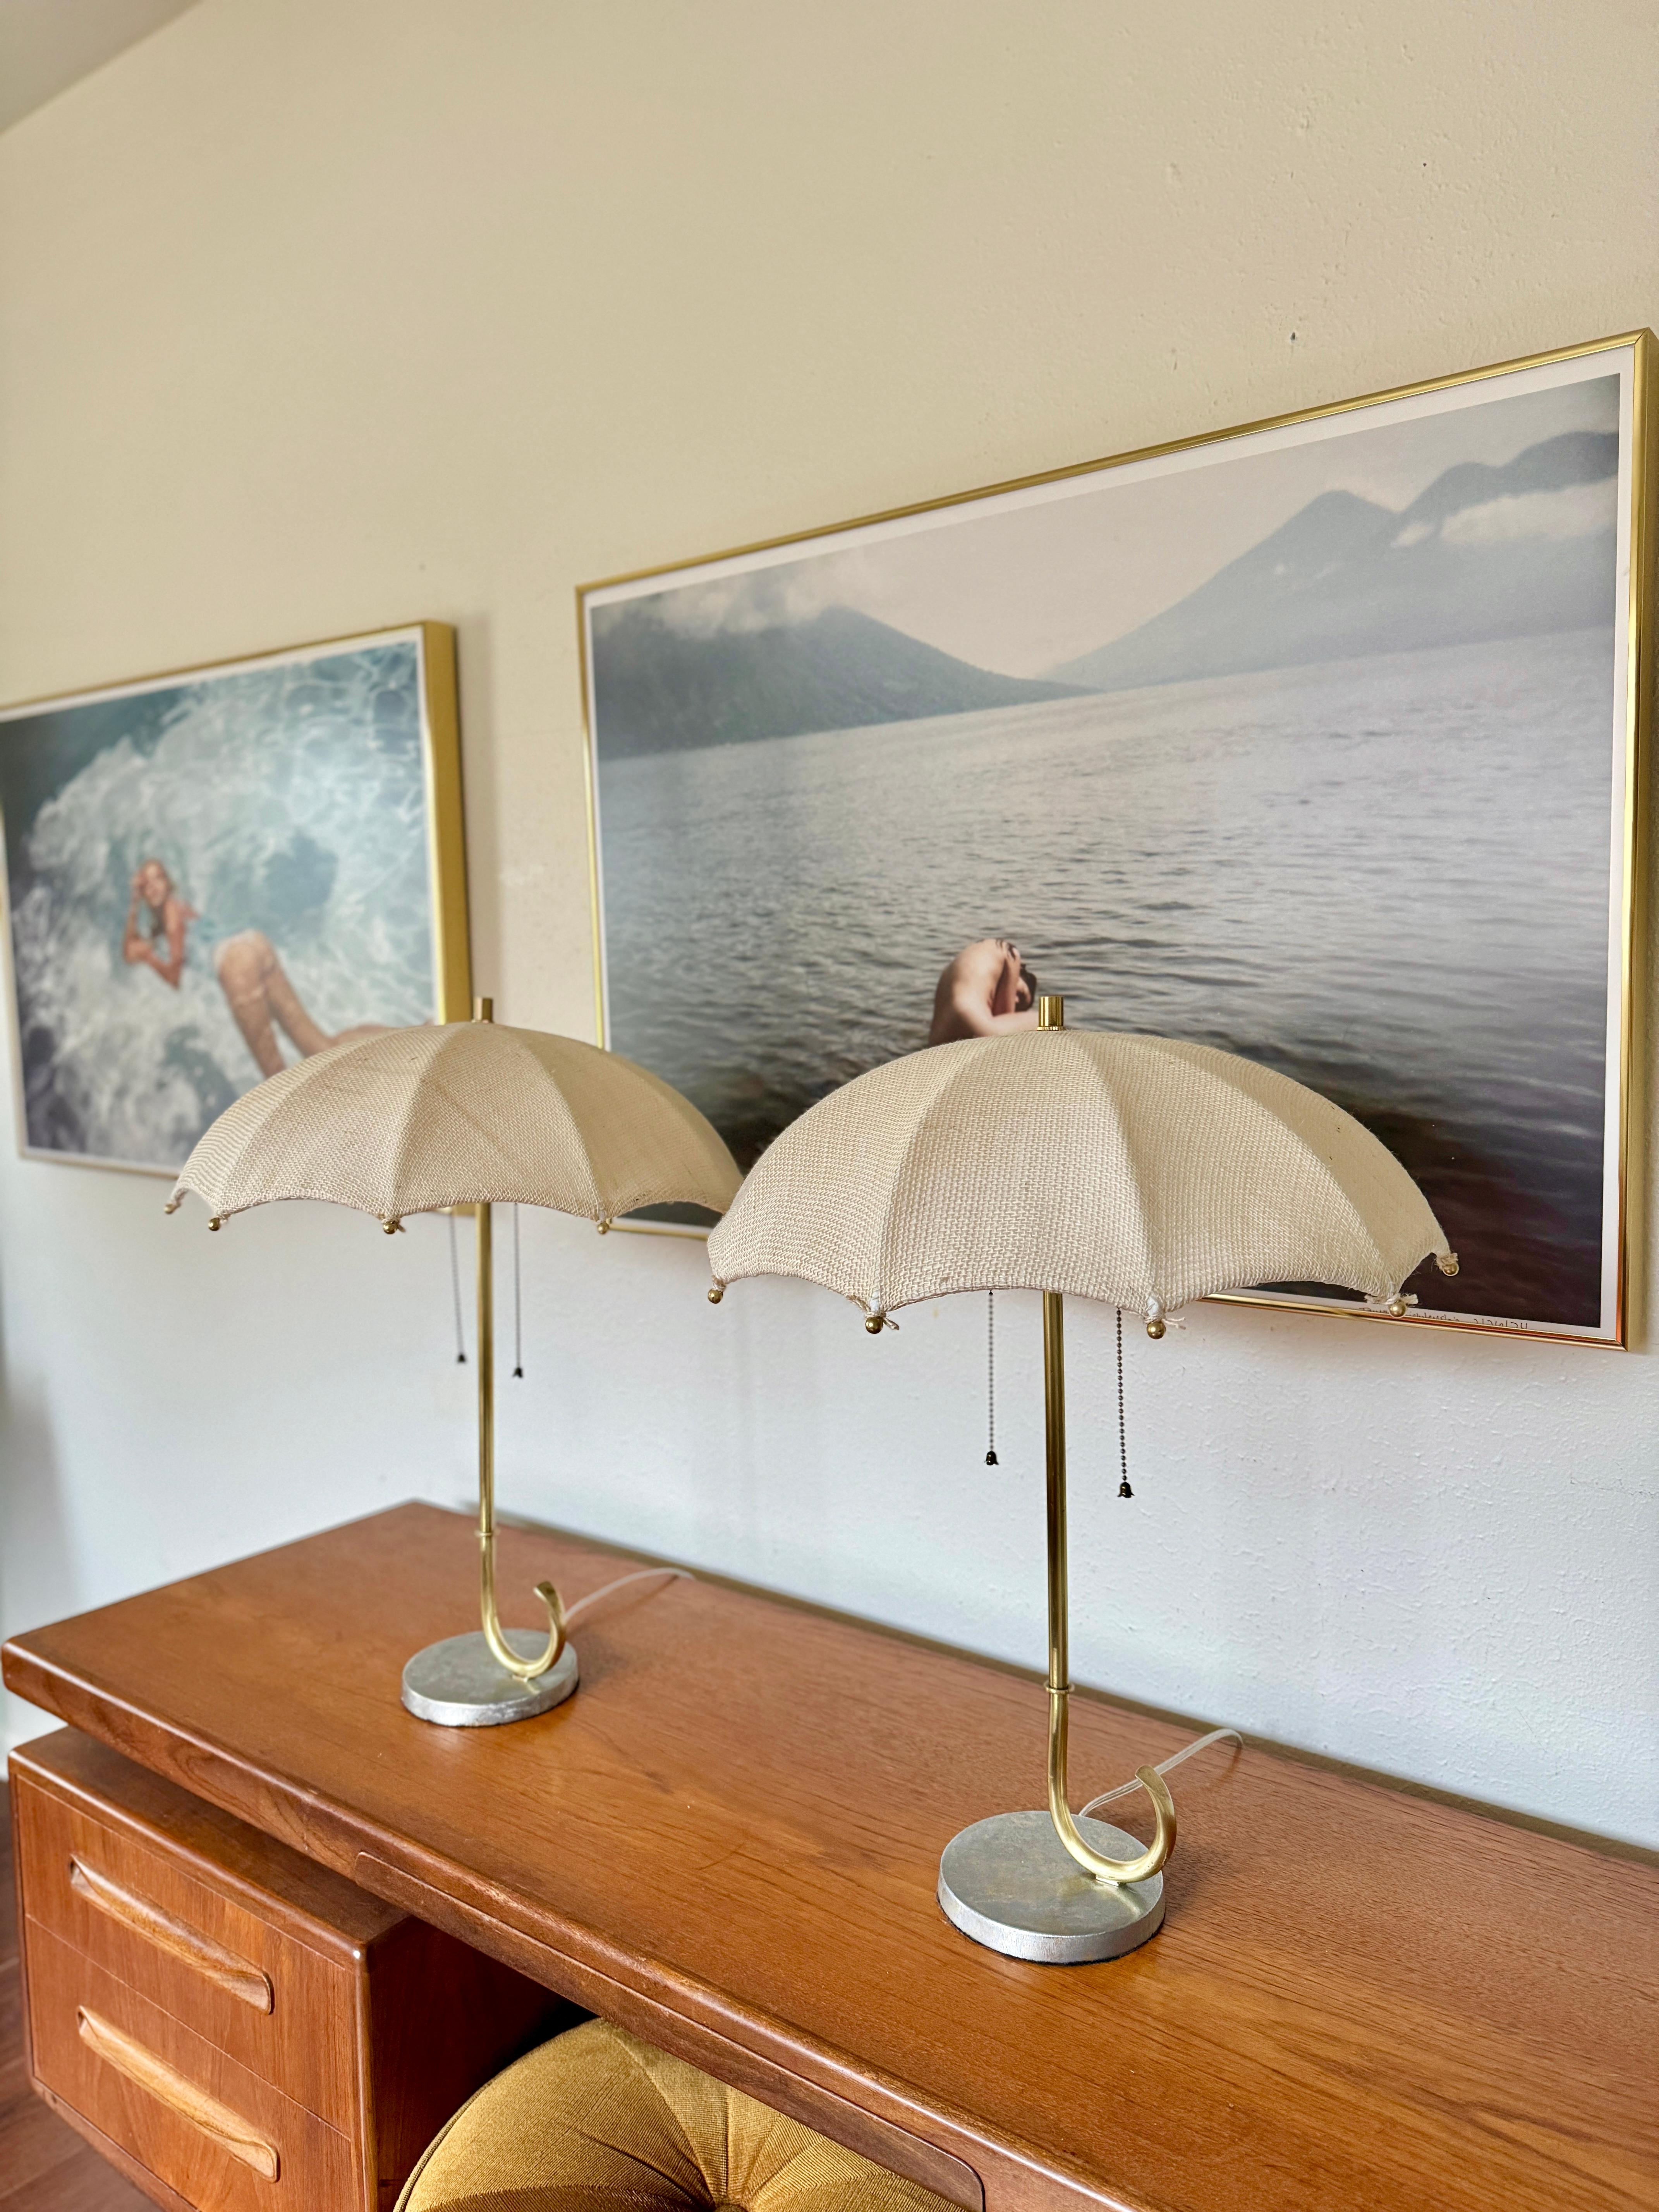 Mid-20th Century Pair of umbrella table lamps by Gilbert Rohde for Mutual Sunset lamp co 1930s For Sale